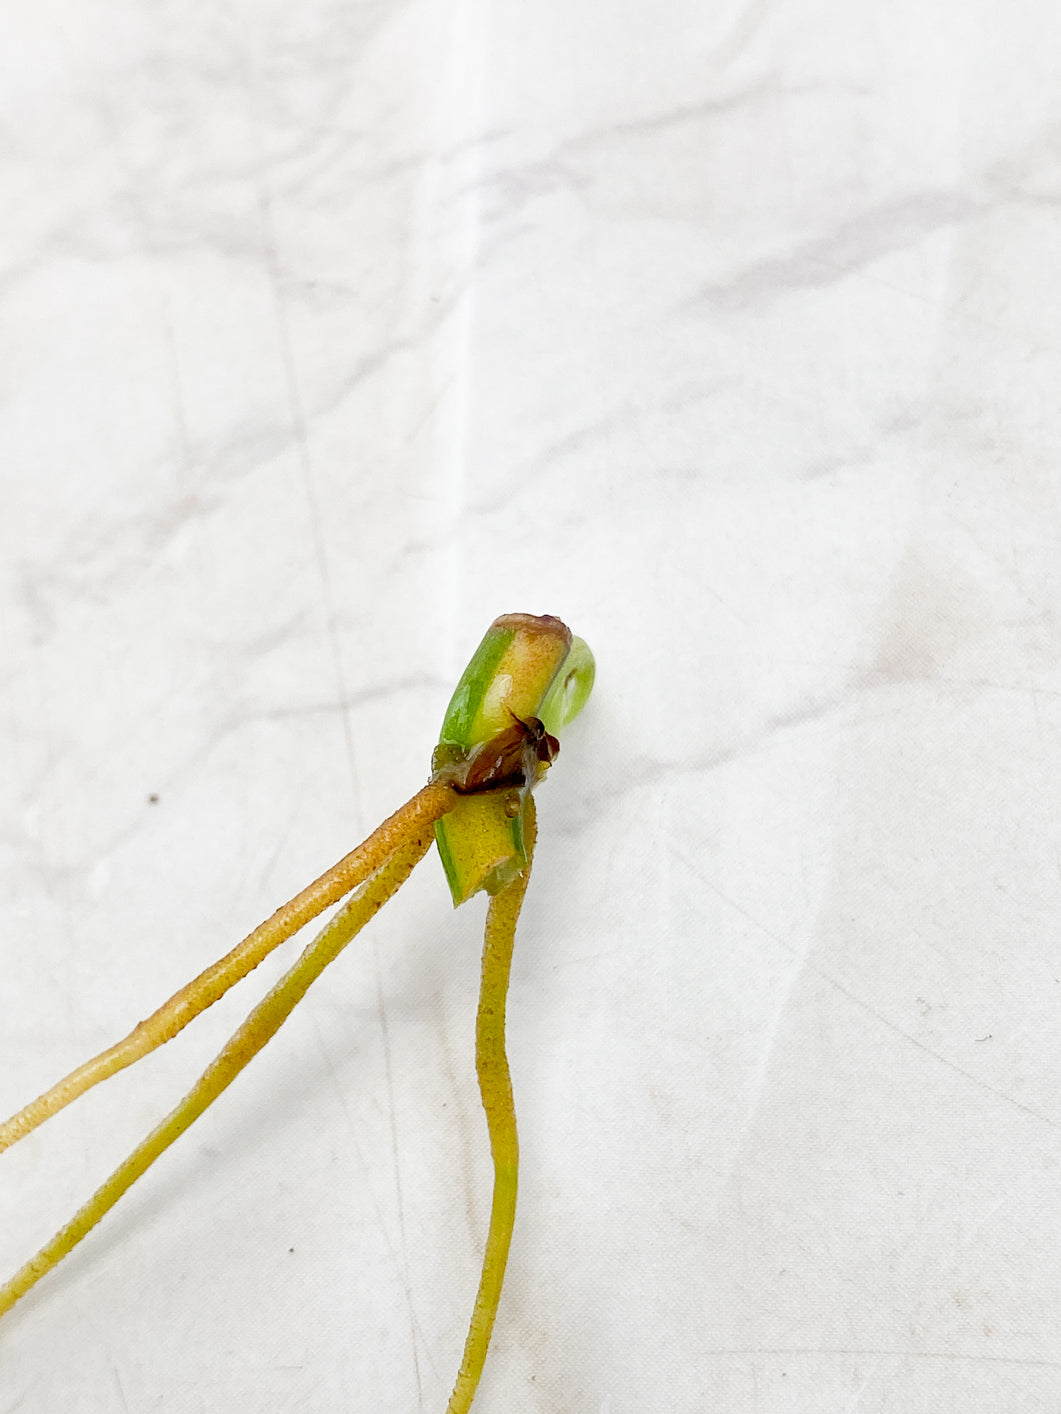 Philodendron Micans Variegated 1 sprout rooting node